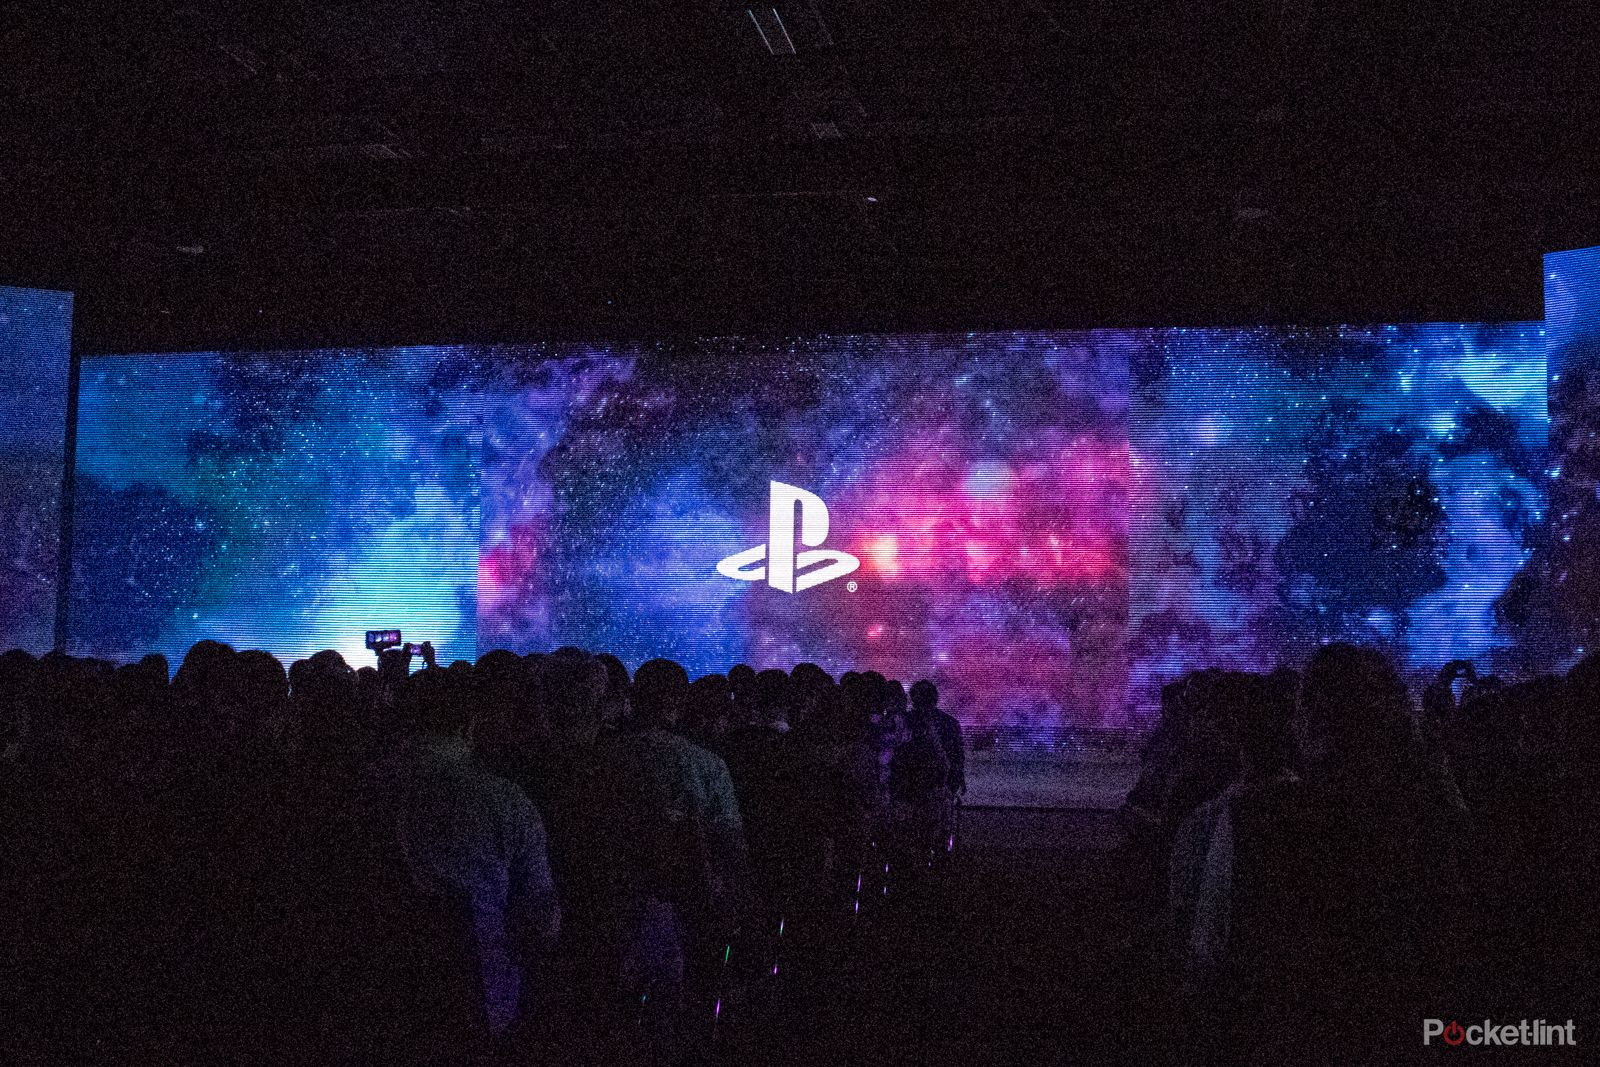 Playstation Paris Games Week Media Showcase When Is It And Can You Watch It Online image 1